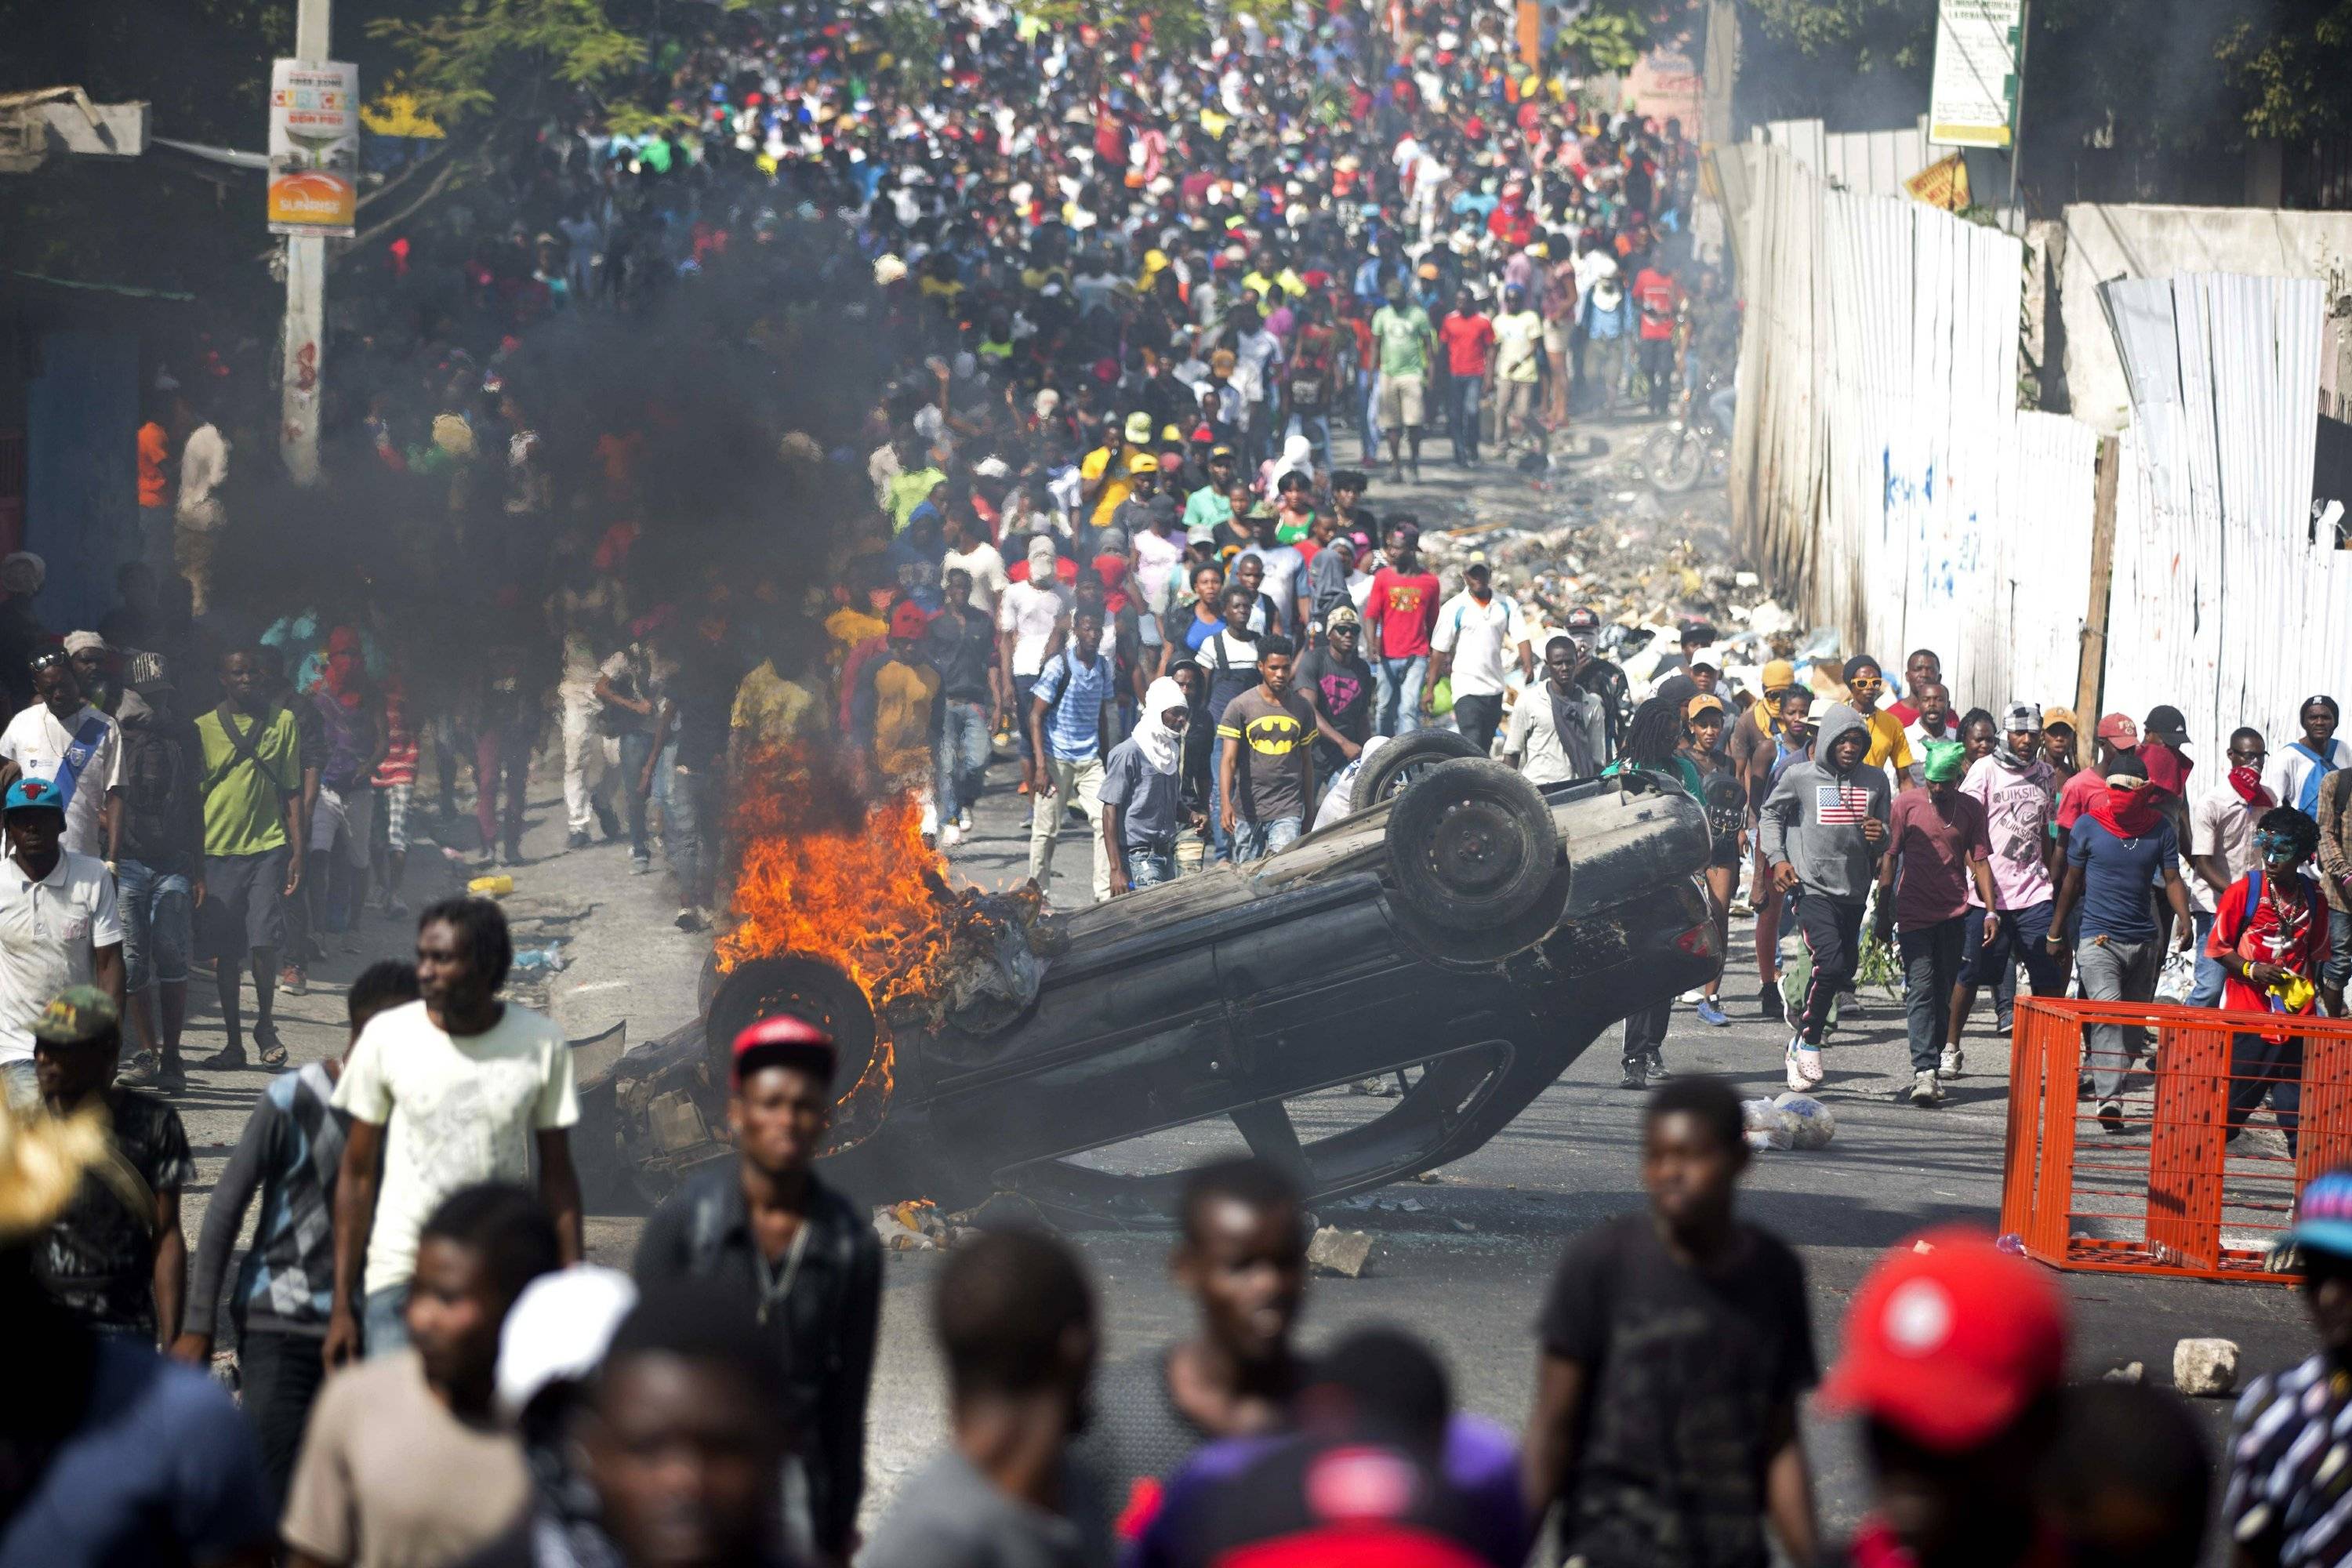 Thousands took to the street today in Haiti in an Anti-Government protest.